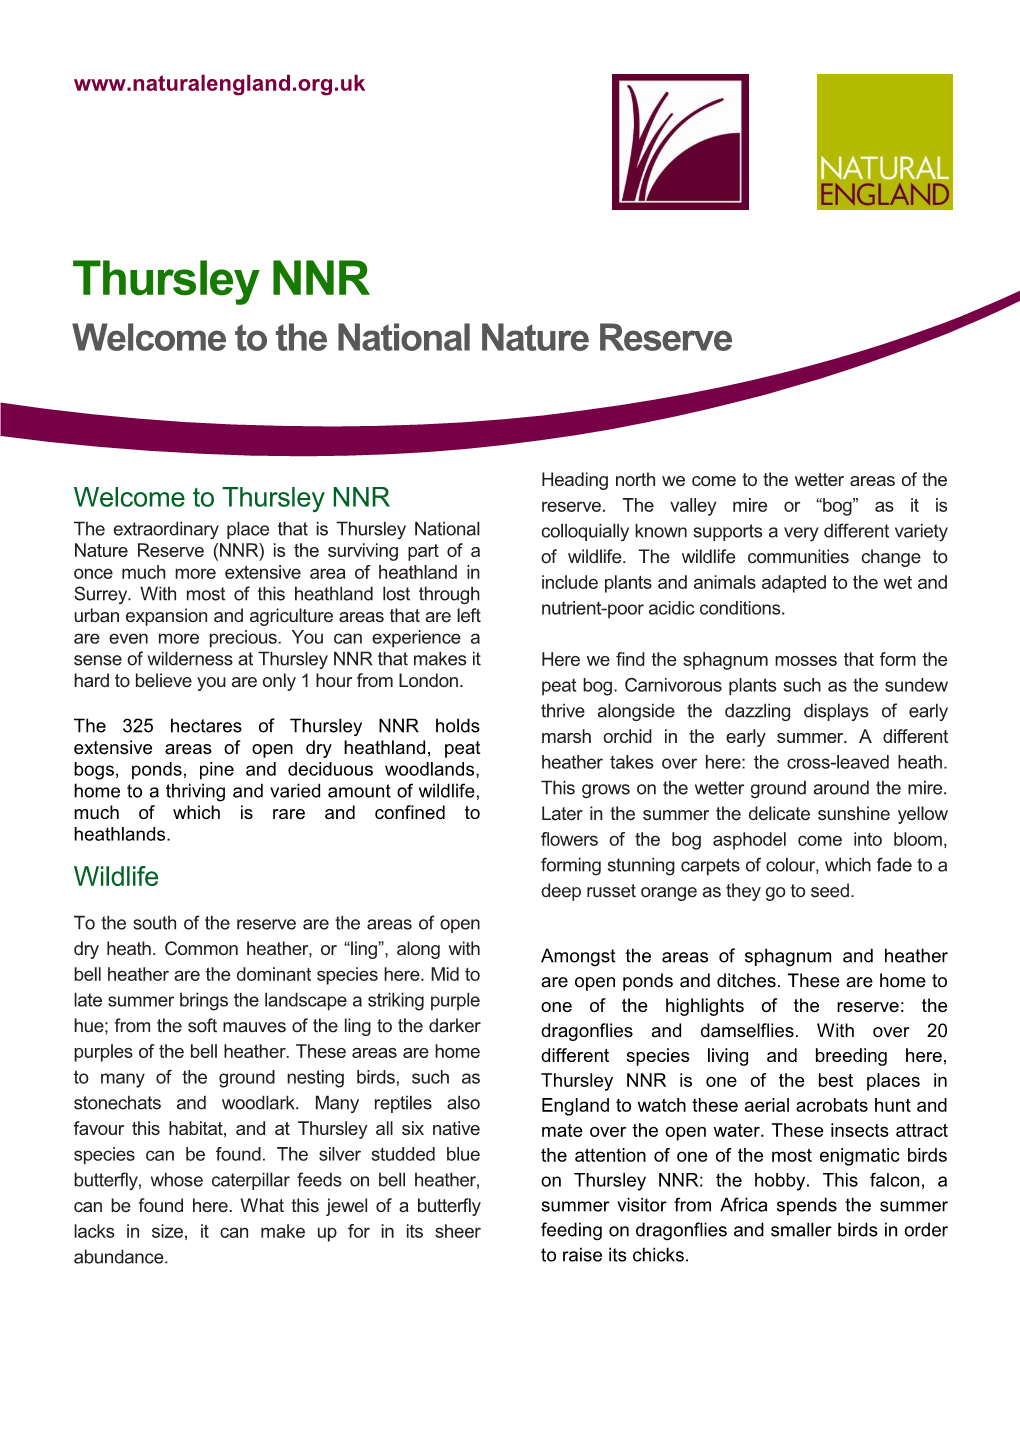 Thursley National Nature Reserve Welcome